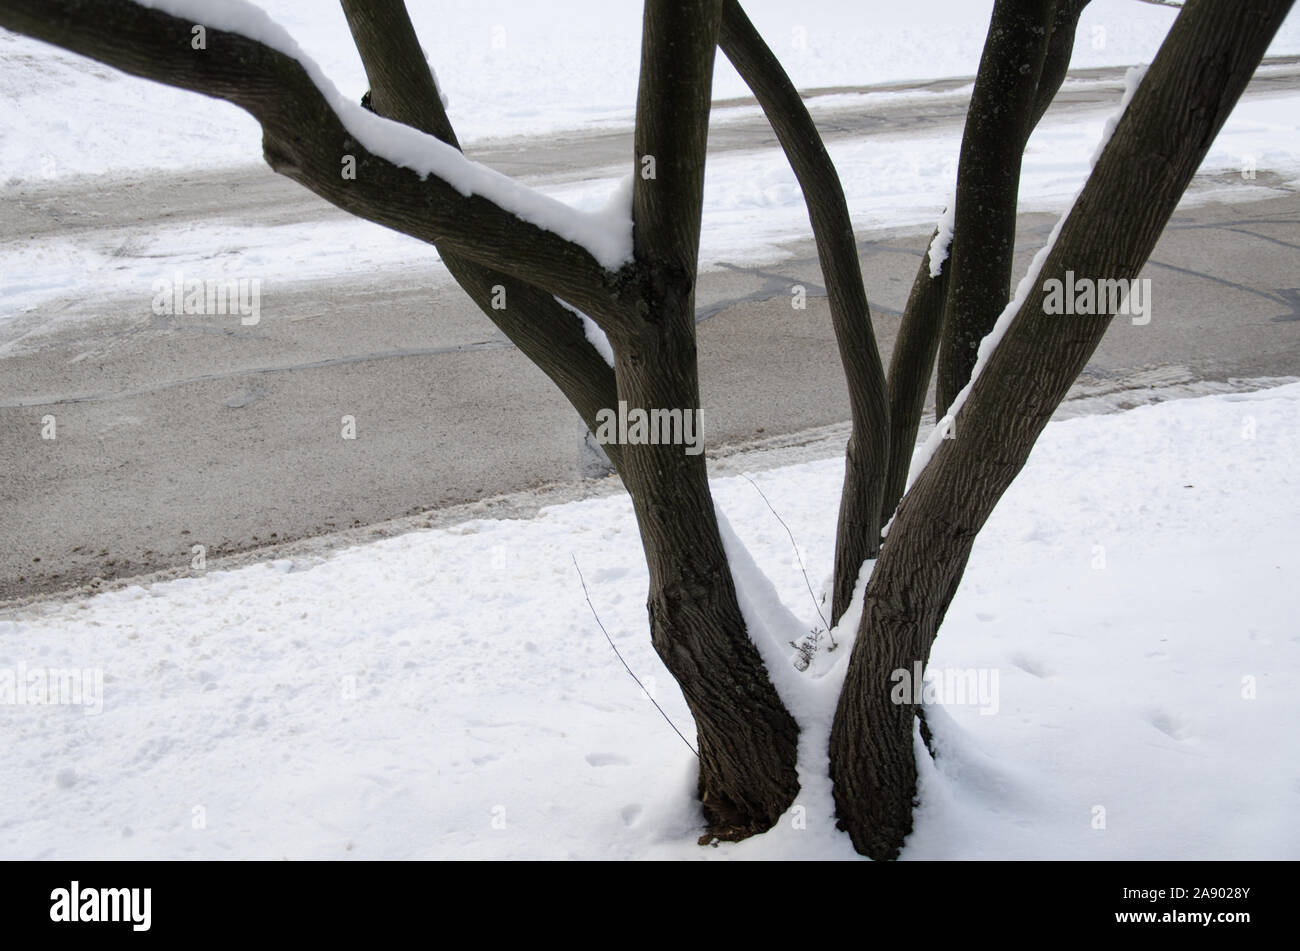 snow snowy tree branches winter cold weather Stock Photo